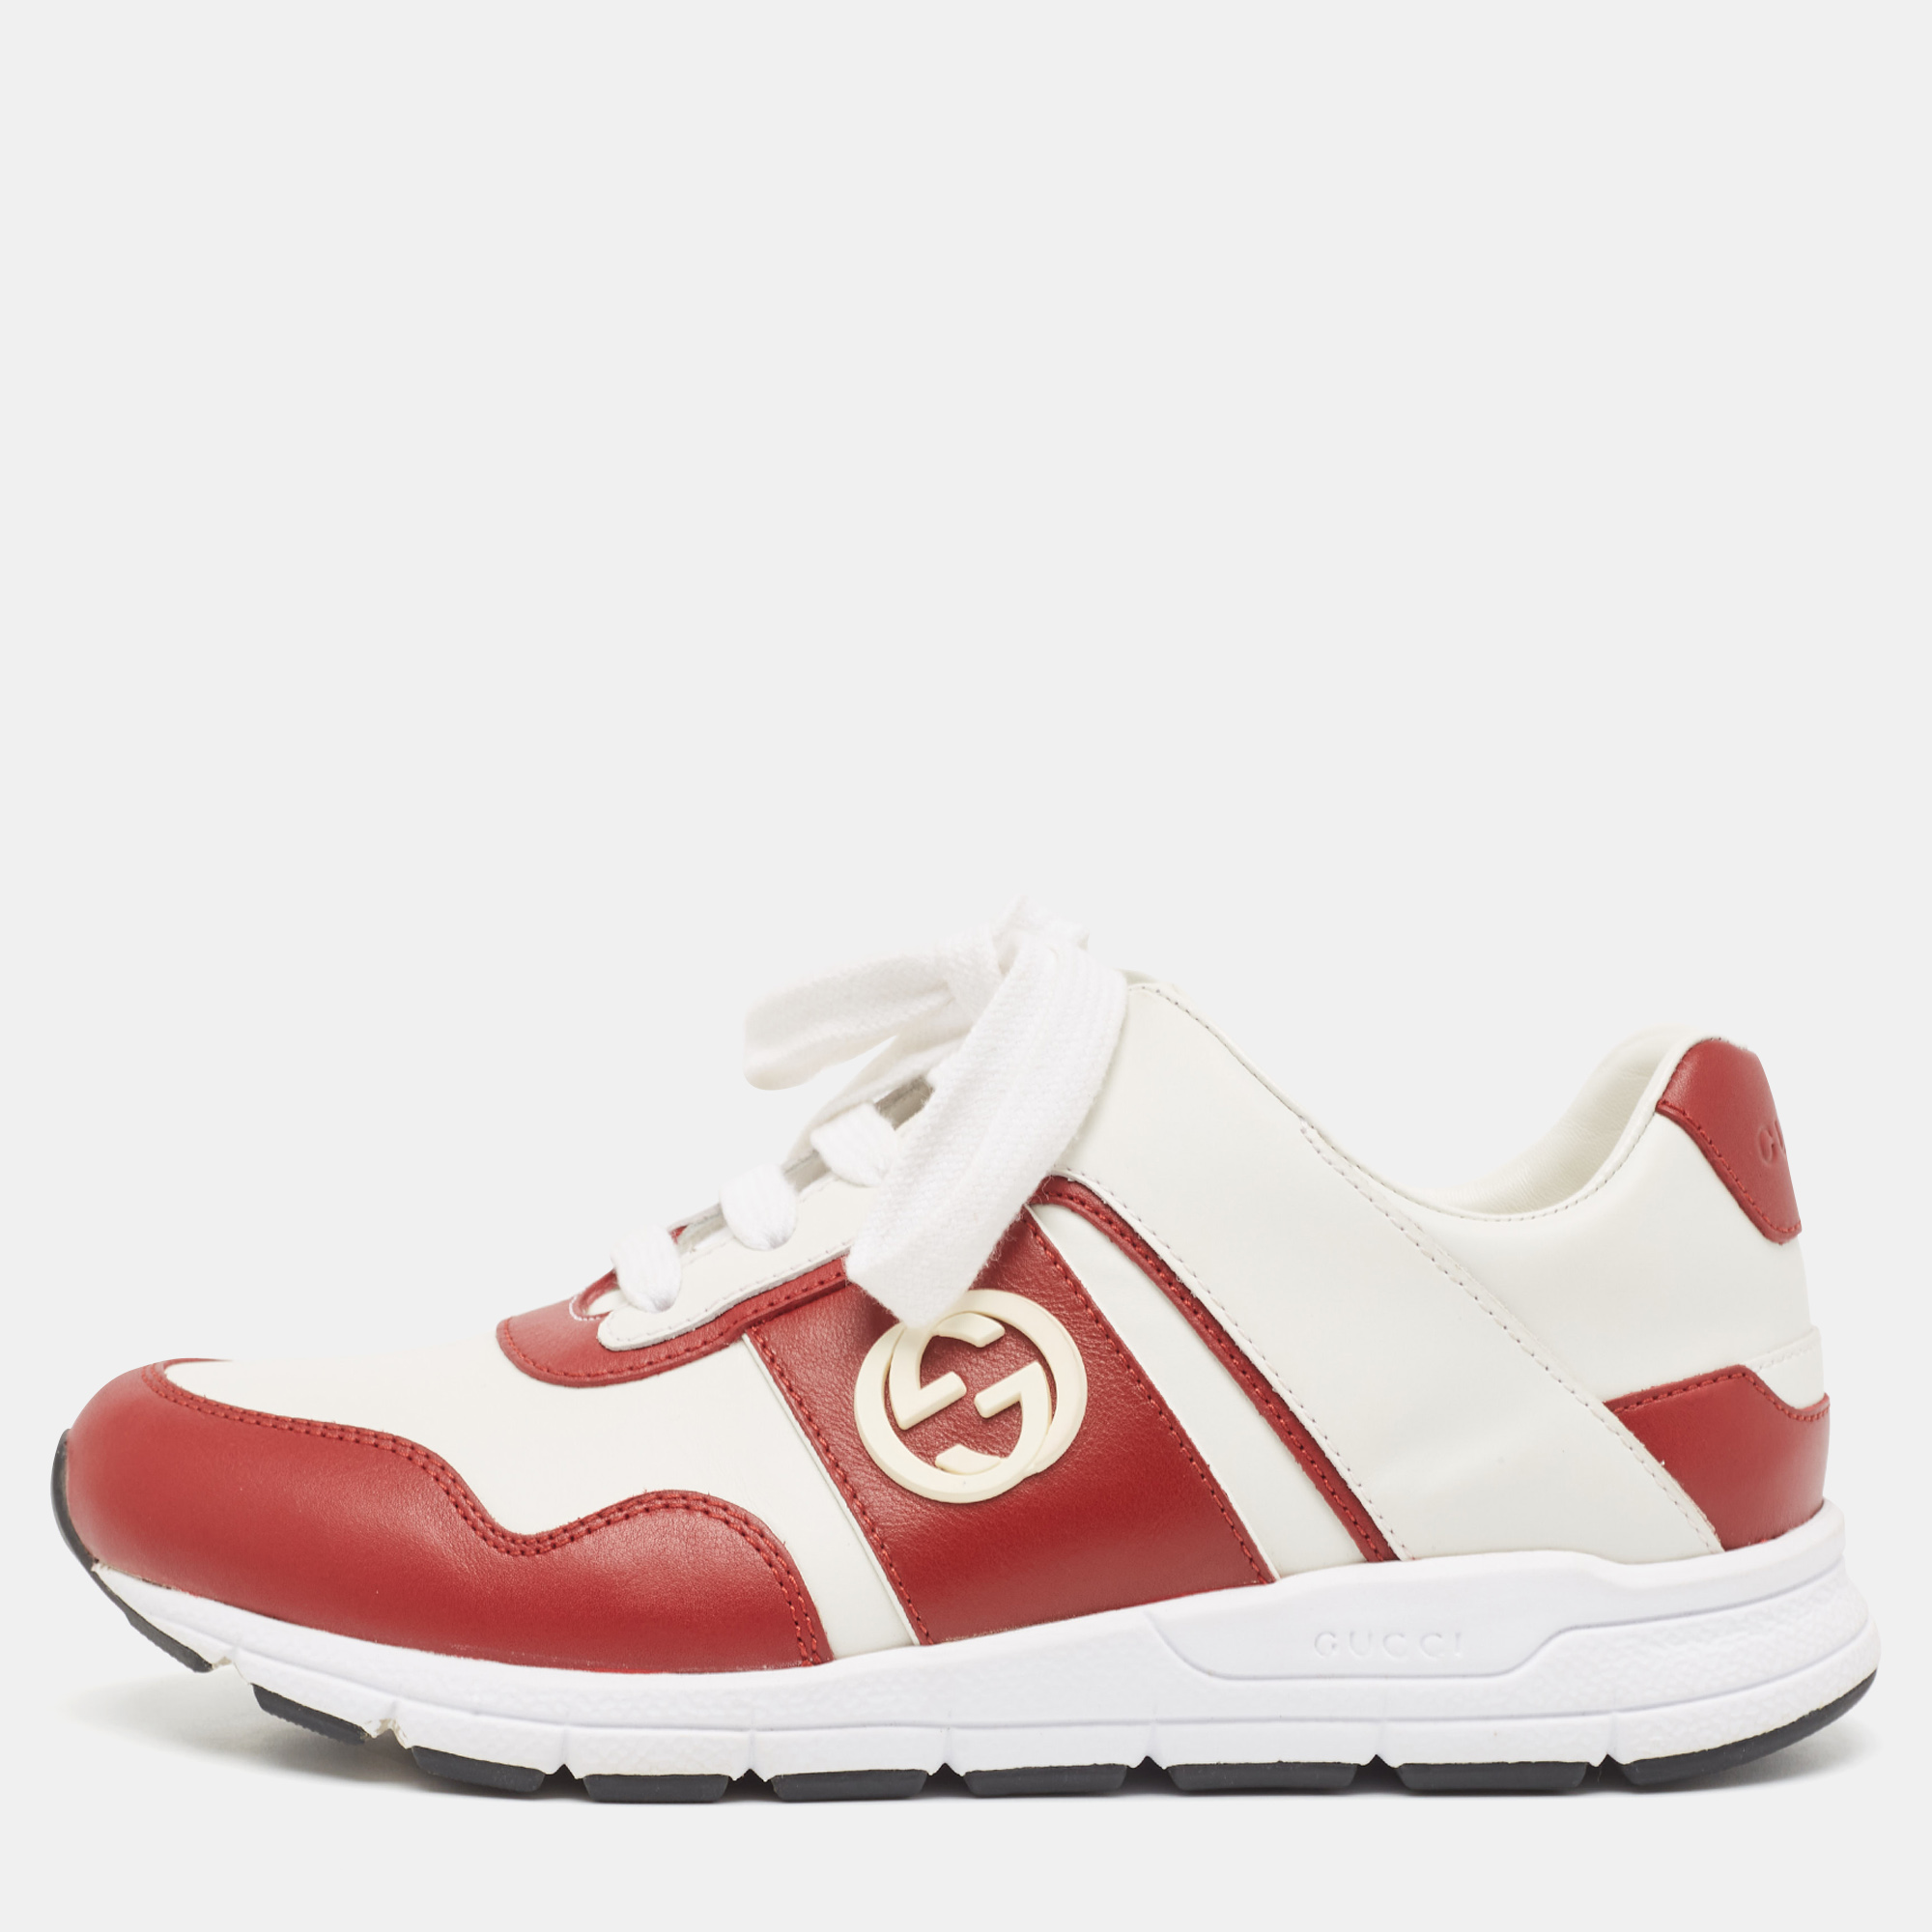 Coming in a classic low top silhouette these Gucci sneakers are a seamless combination of luxury comfort and style. They are made from leather in a white and red shade. These sneakers are designed with interlocking G logos on the side laced up vamps and comfortable insoles.